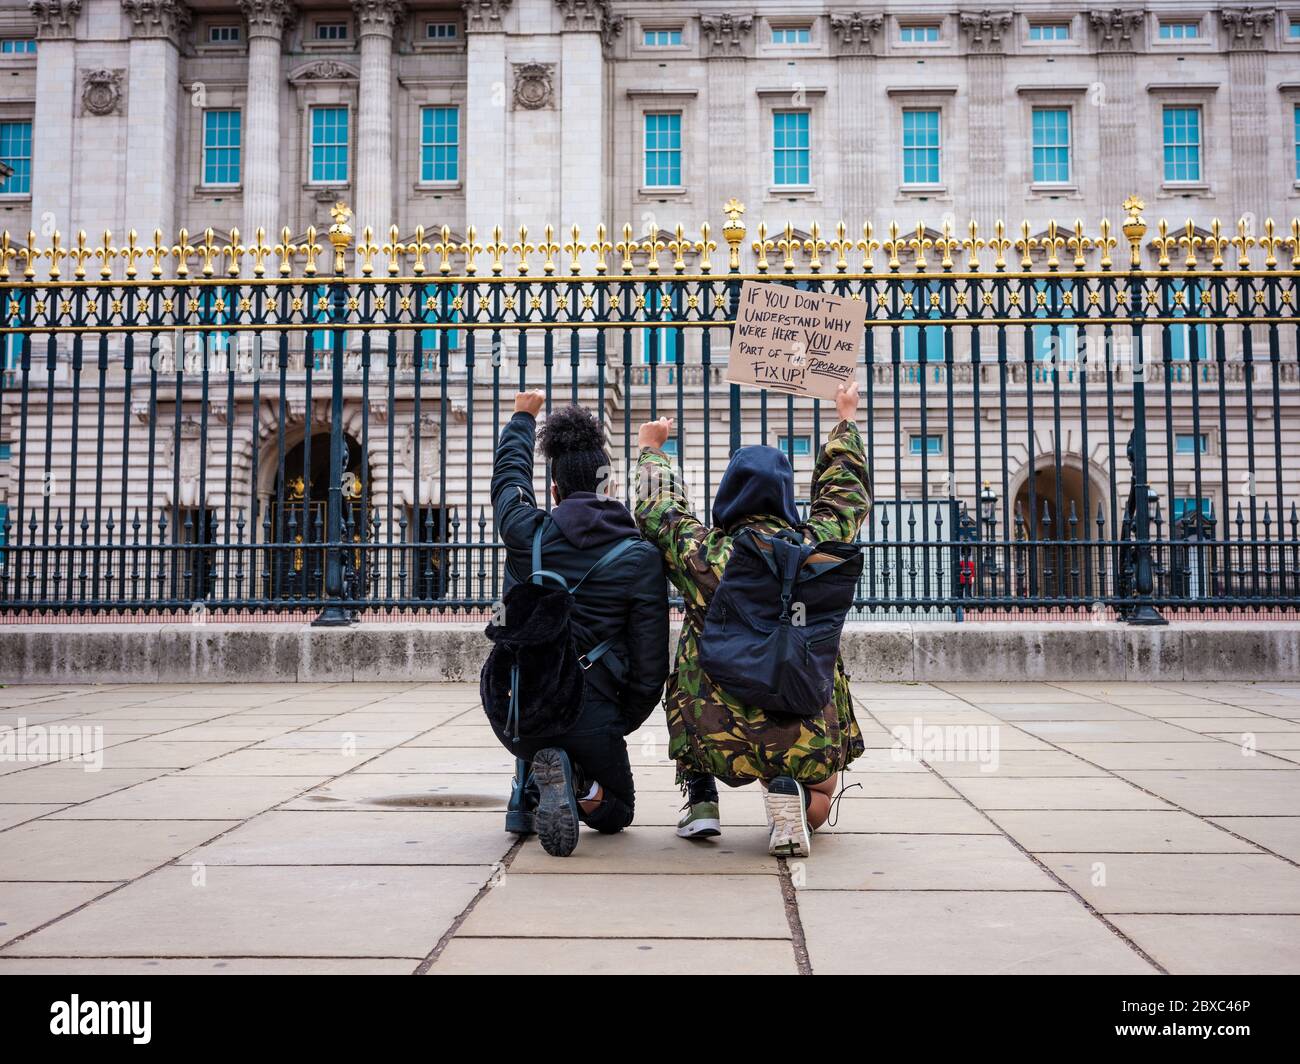 London Uk 6th June 2020 Two Ladies Take The Knee Outside Buckingham Palace During The Black Lives Matter Protest In In London In Memory Of George Floyd Who Was Killed On The